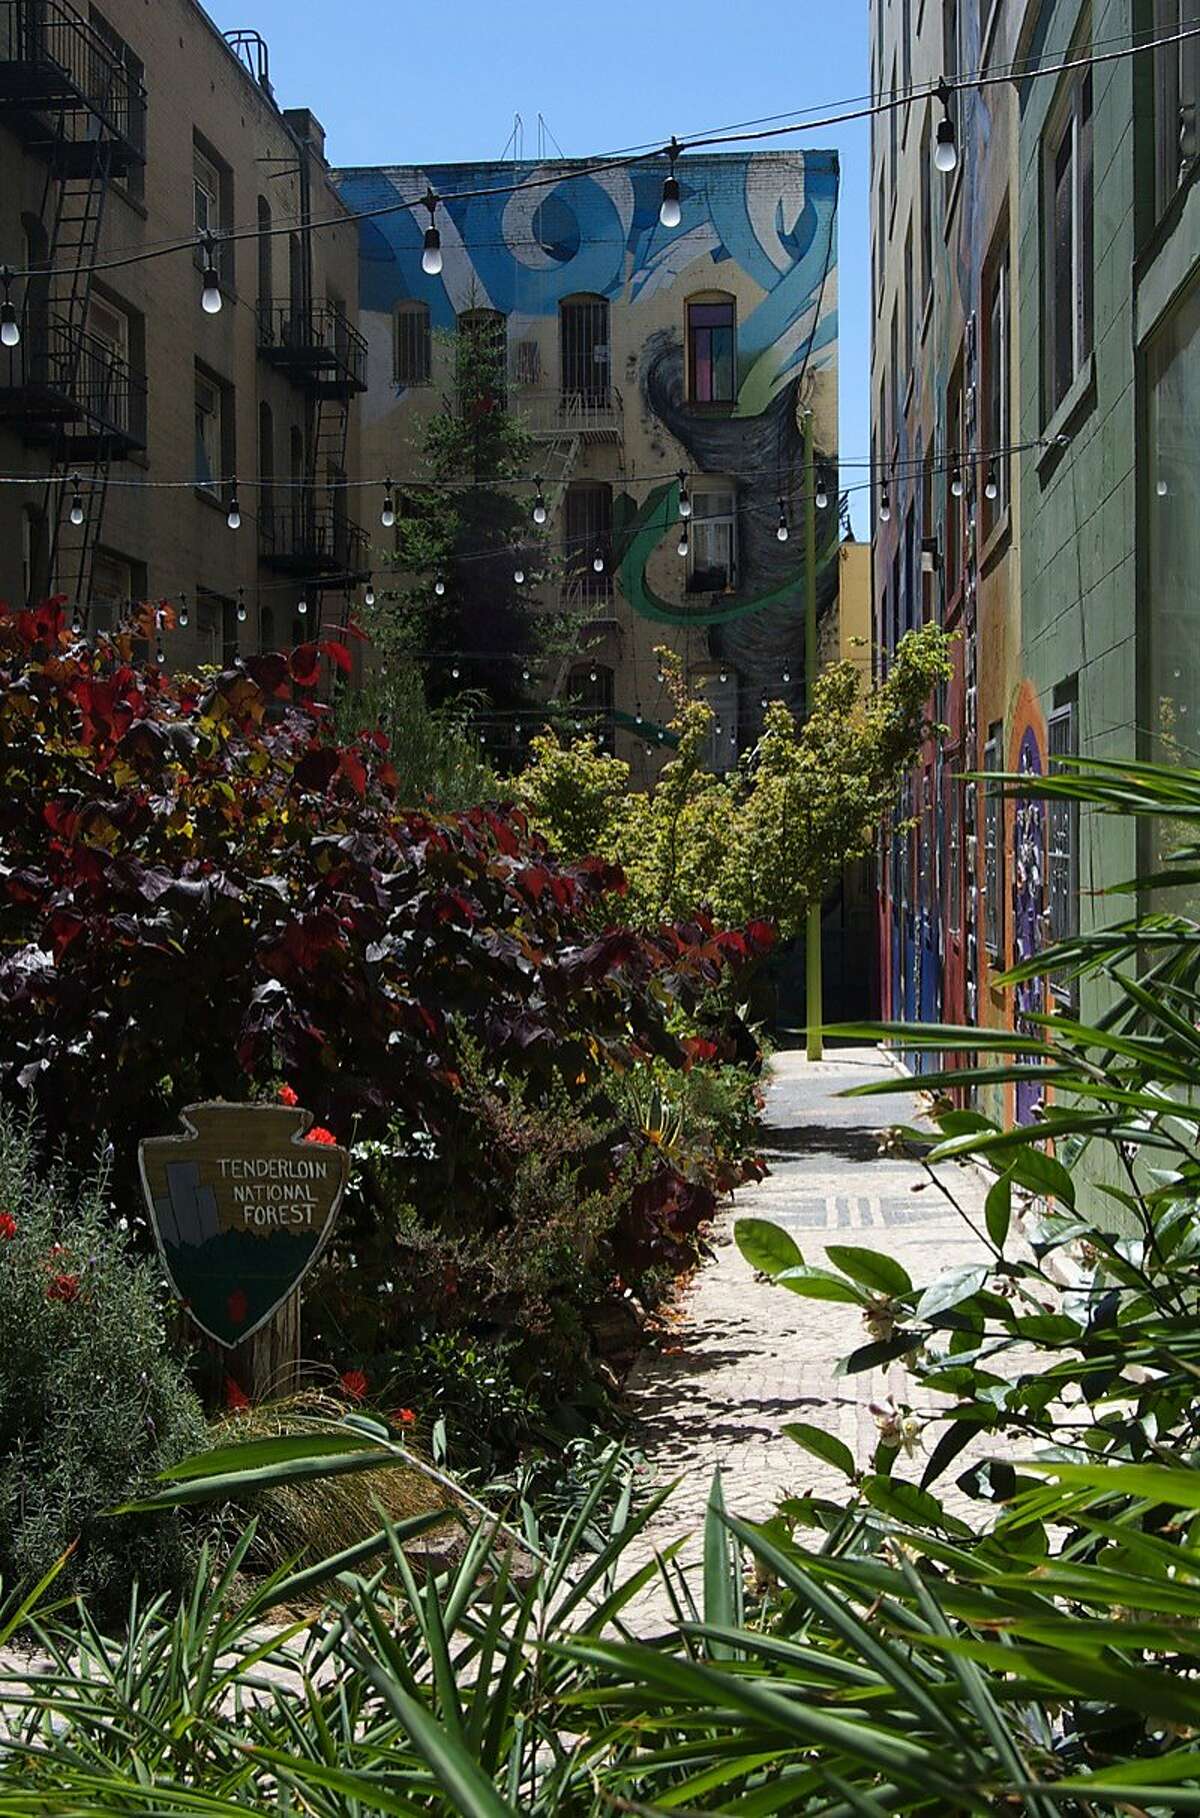 The hidden gems — like the "Tenderloin National Forest," created by Darryl Smith of Luggage Store Gallery — will startle you with their beauty